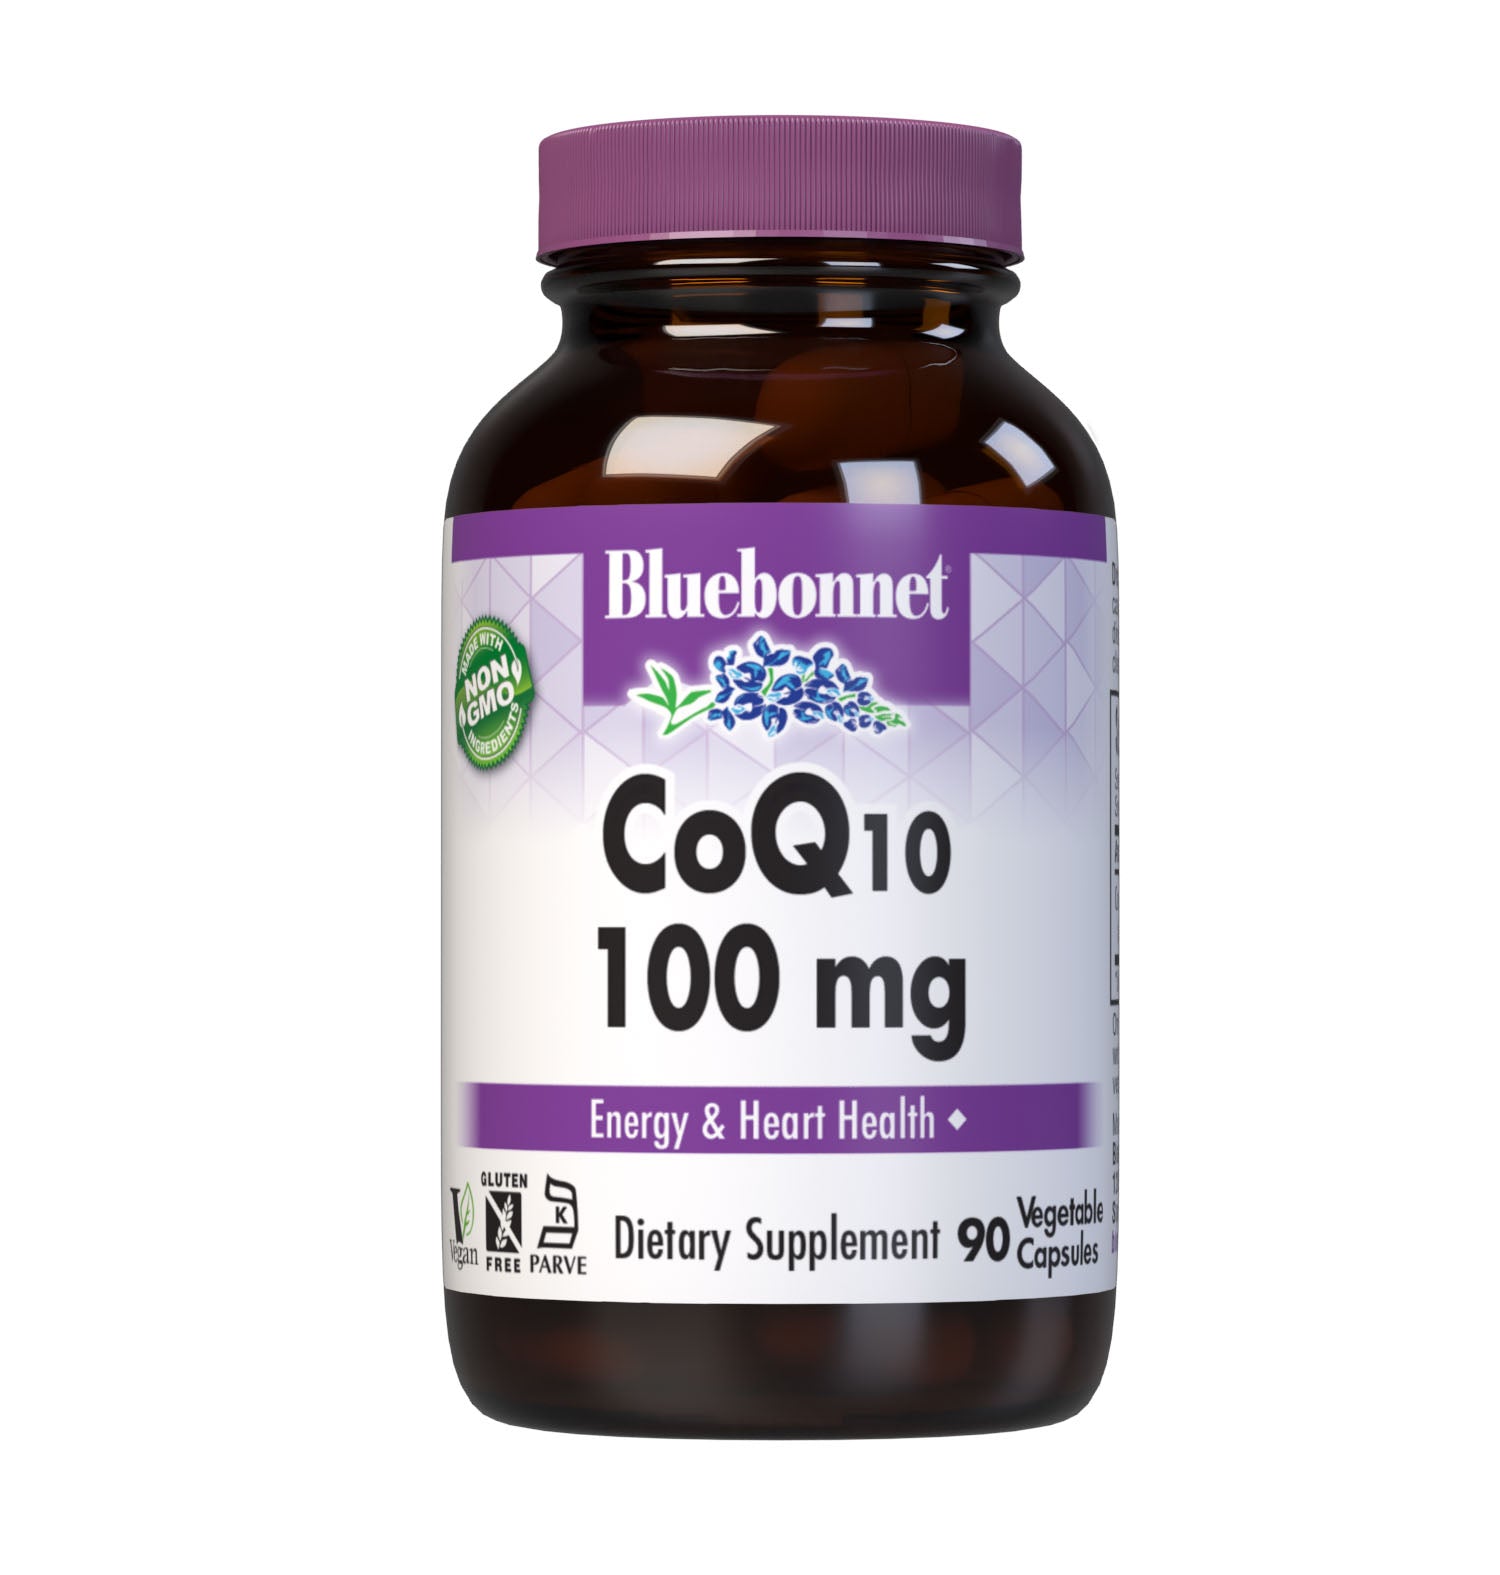 Bluebonnet’s CoQ10 100 mg 90 Vegetable Capsules provide 100% “trans-isomer” coenzyme Q10. Available in easy-to-swallow vegetable capsules for maximum assimilation and absorption. #size_90 count